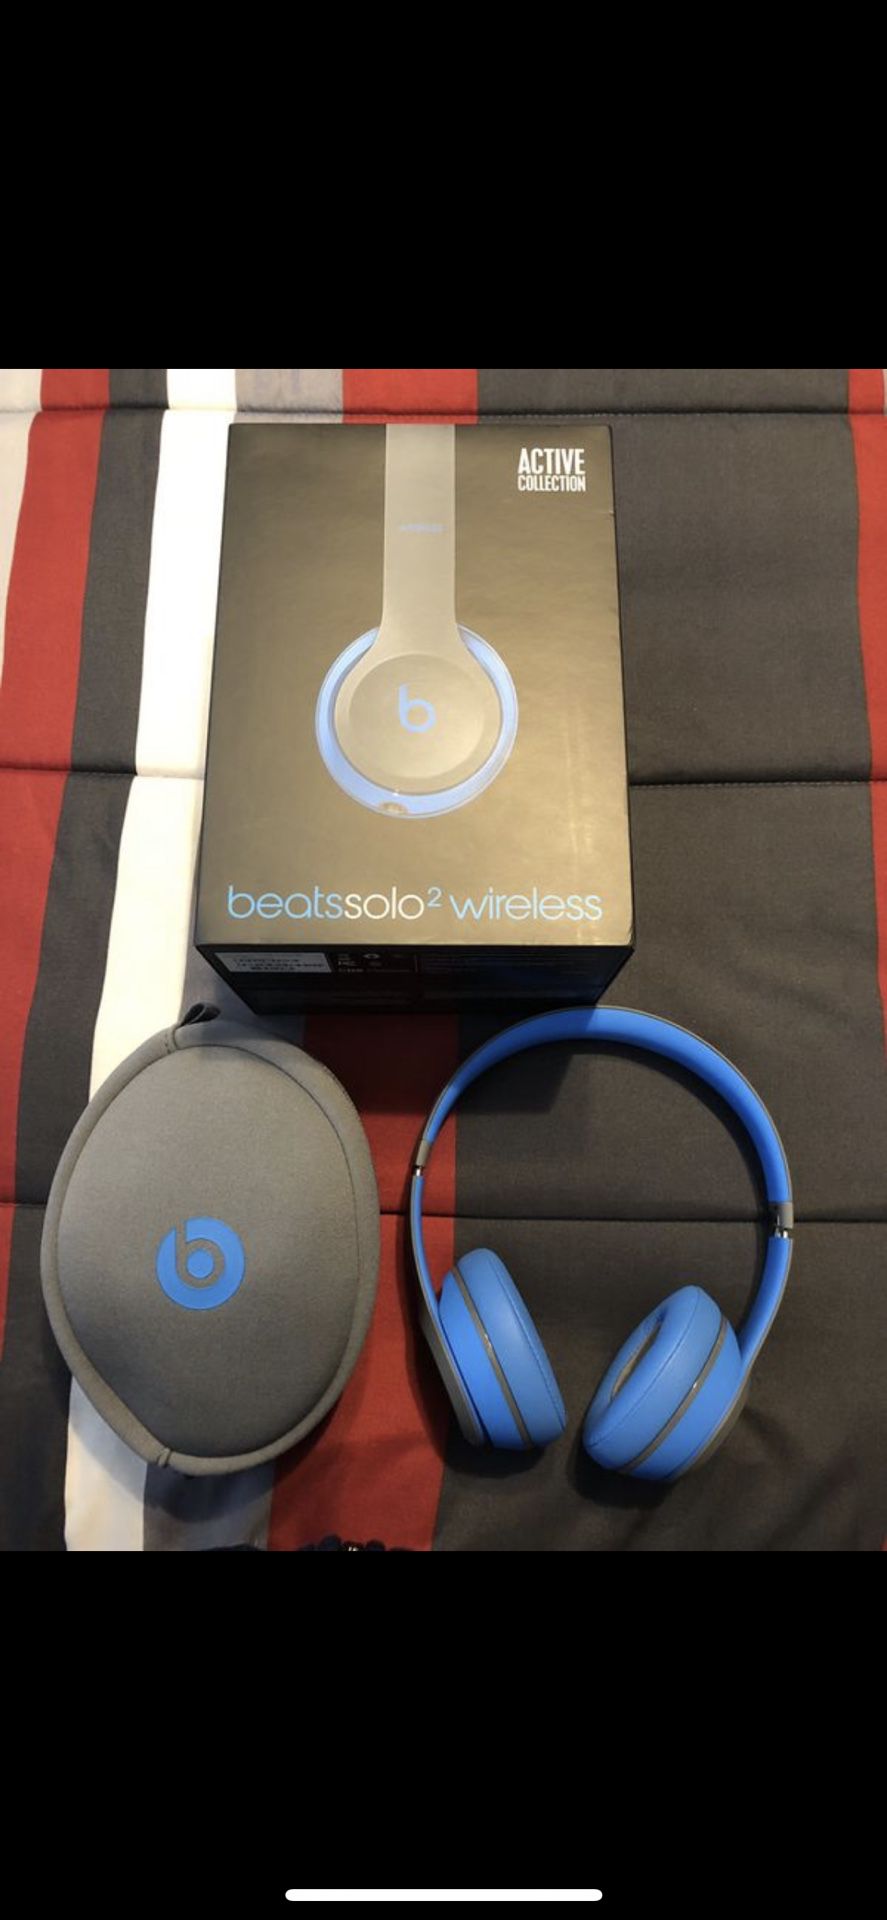 Beats solo 2 active wireless collection